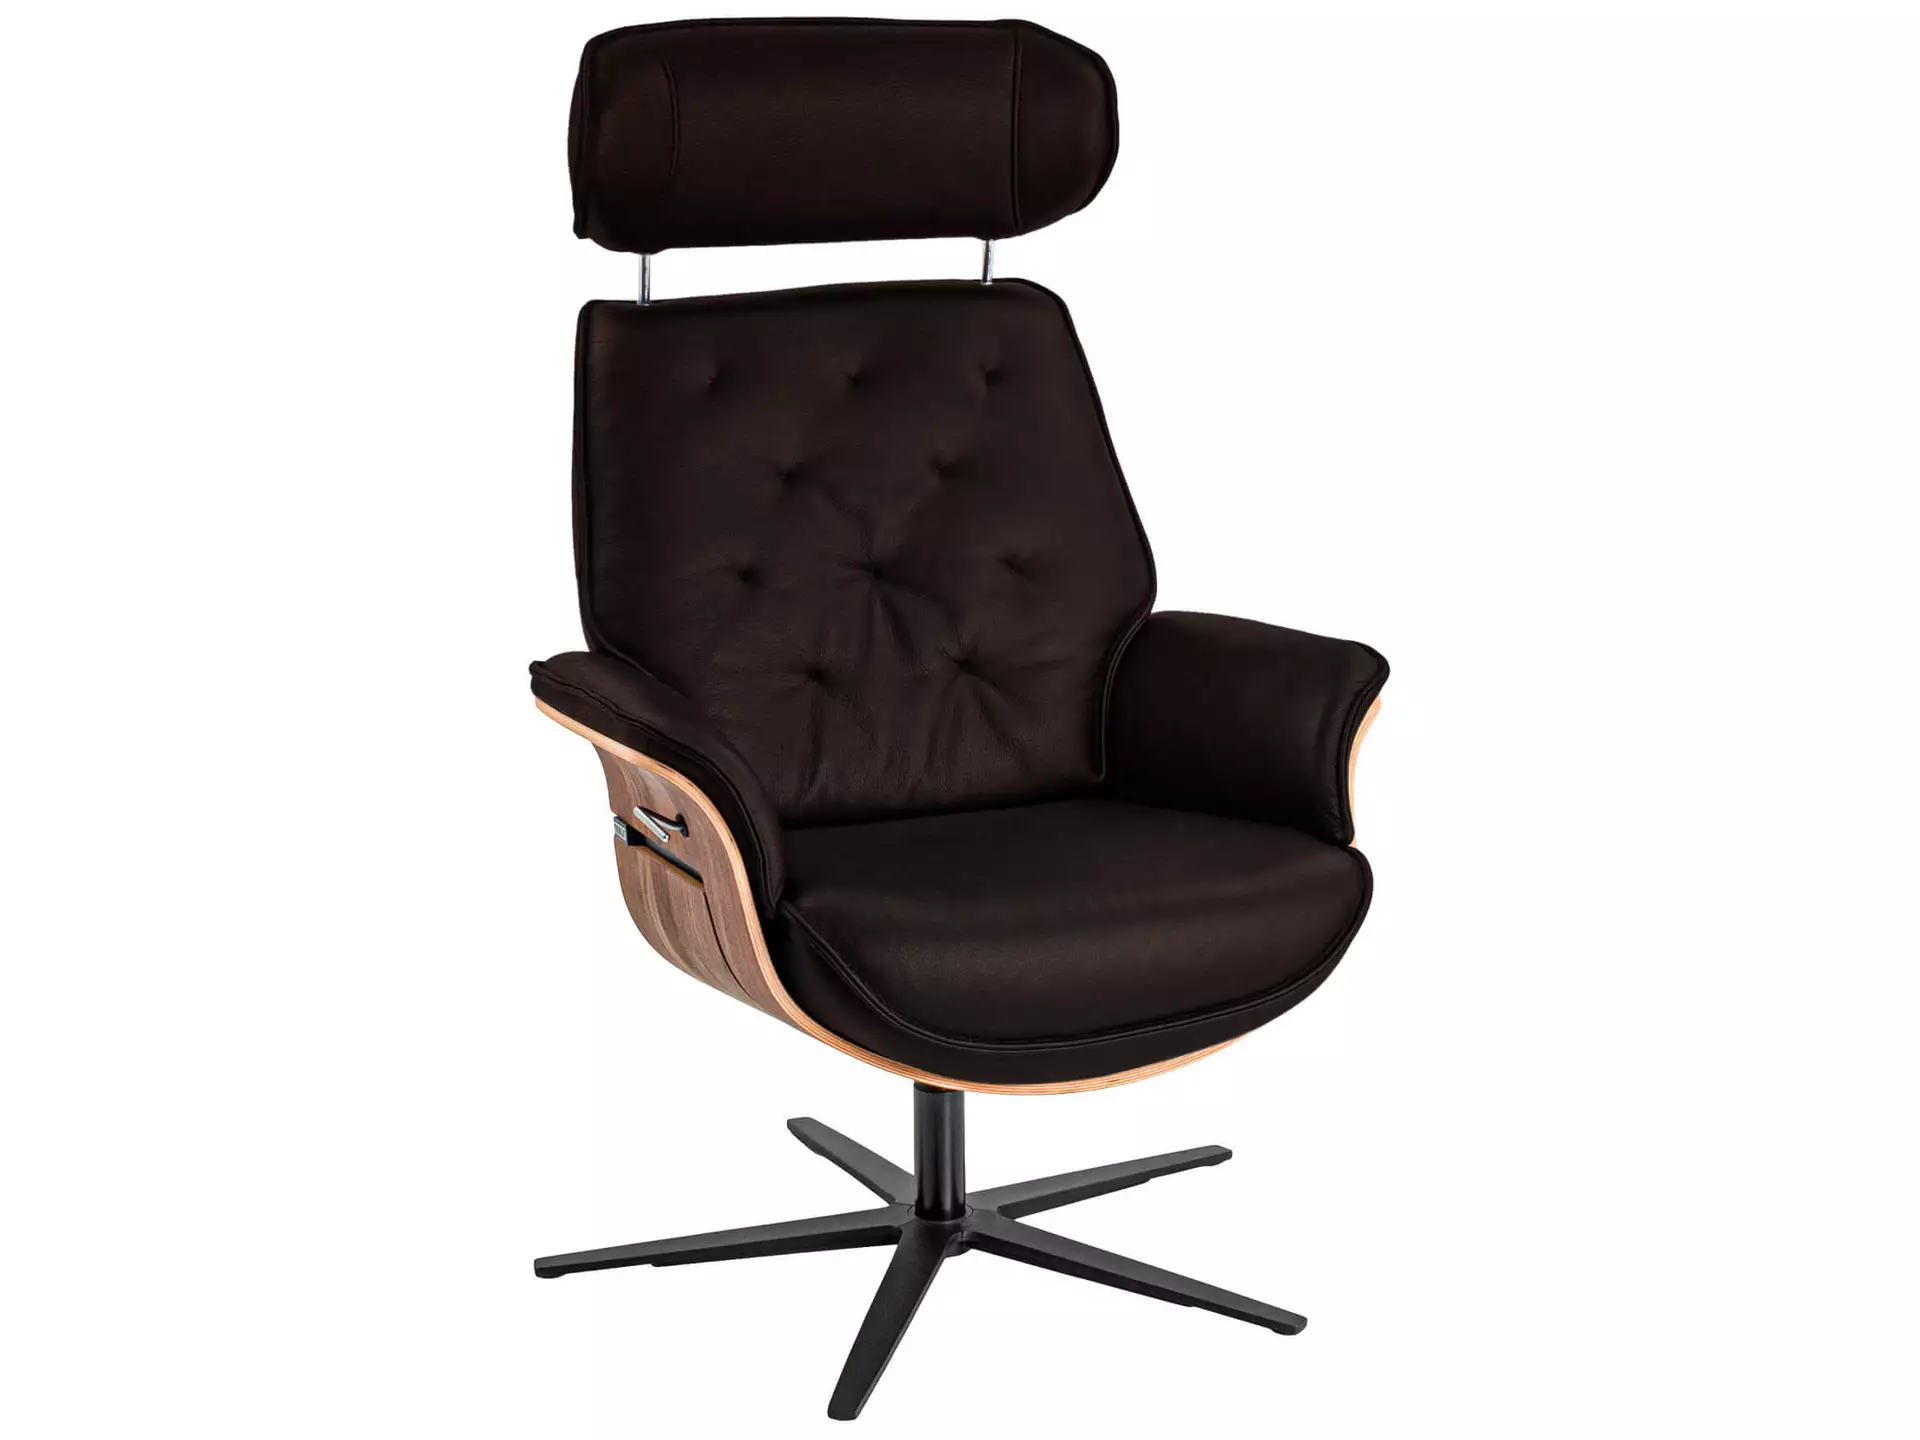 Relaxer Curacao Nussbaum Basic Polipol / Farbe: Anthrazit / Material: Stoff Basic